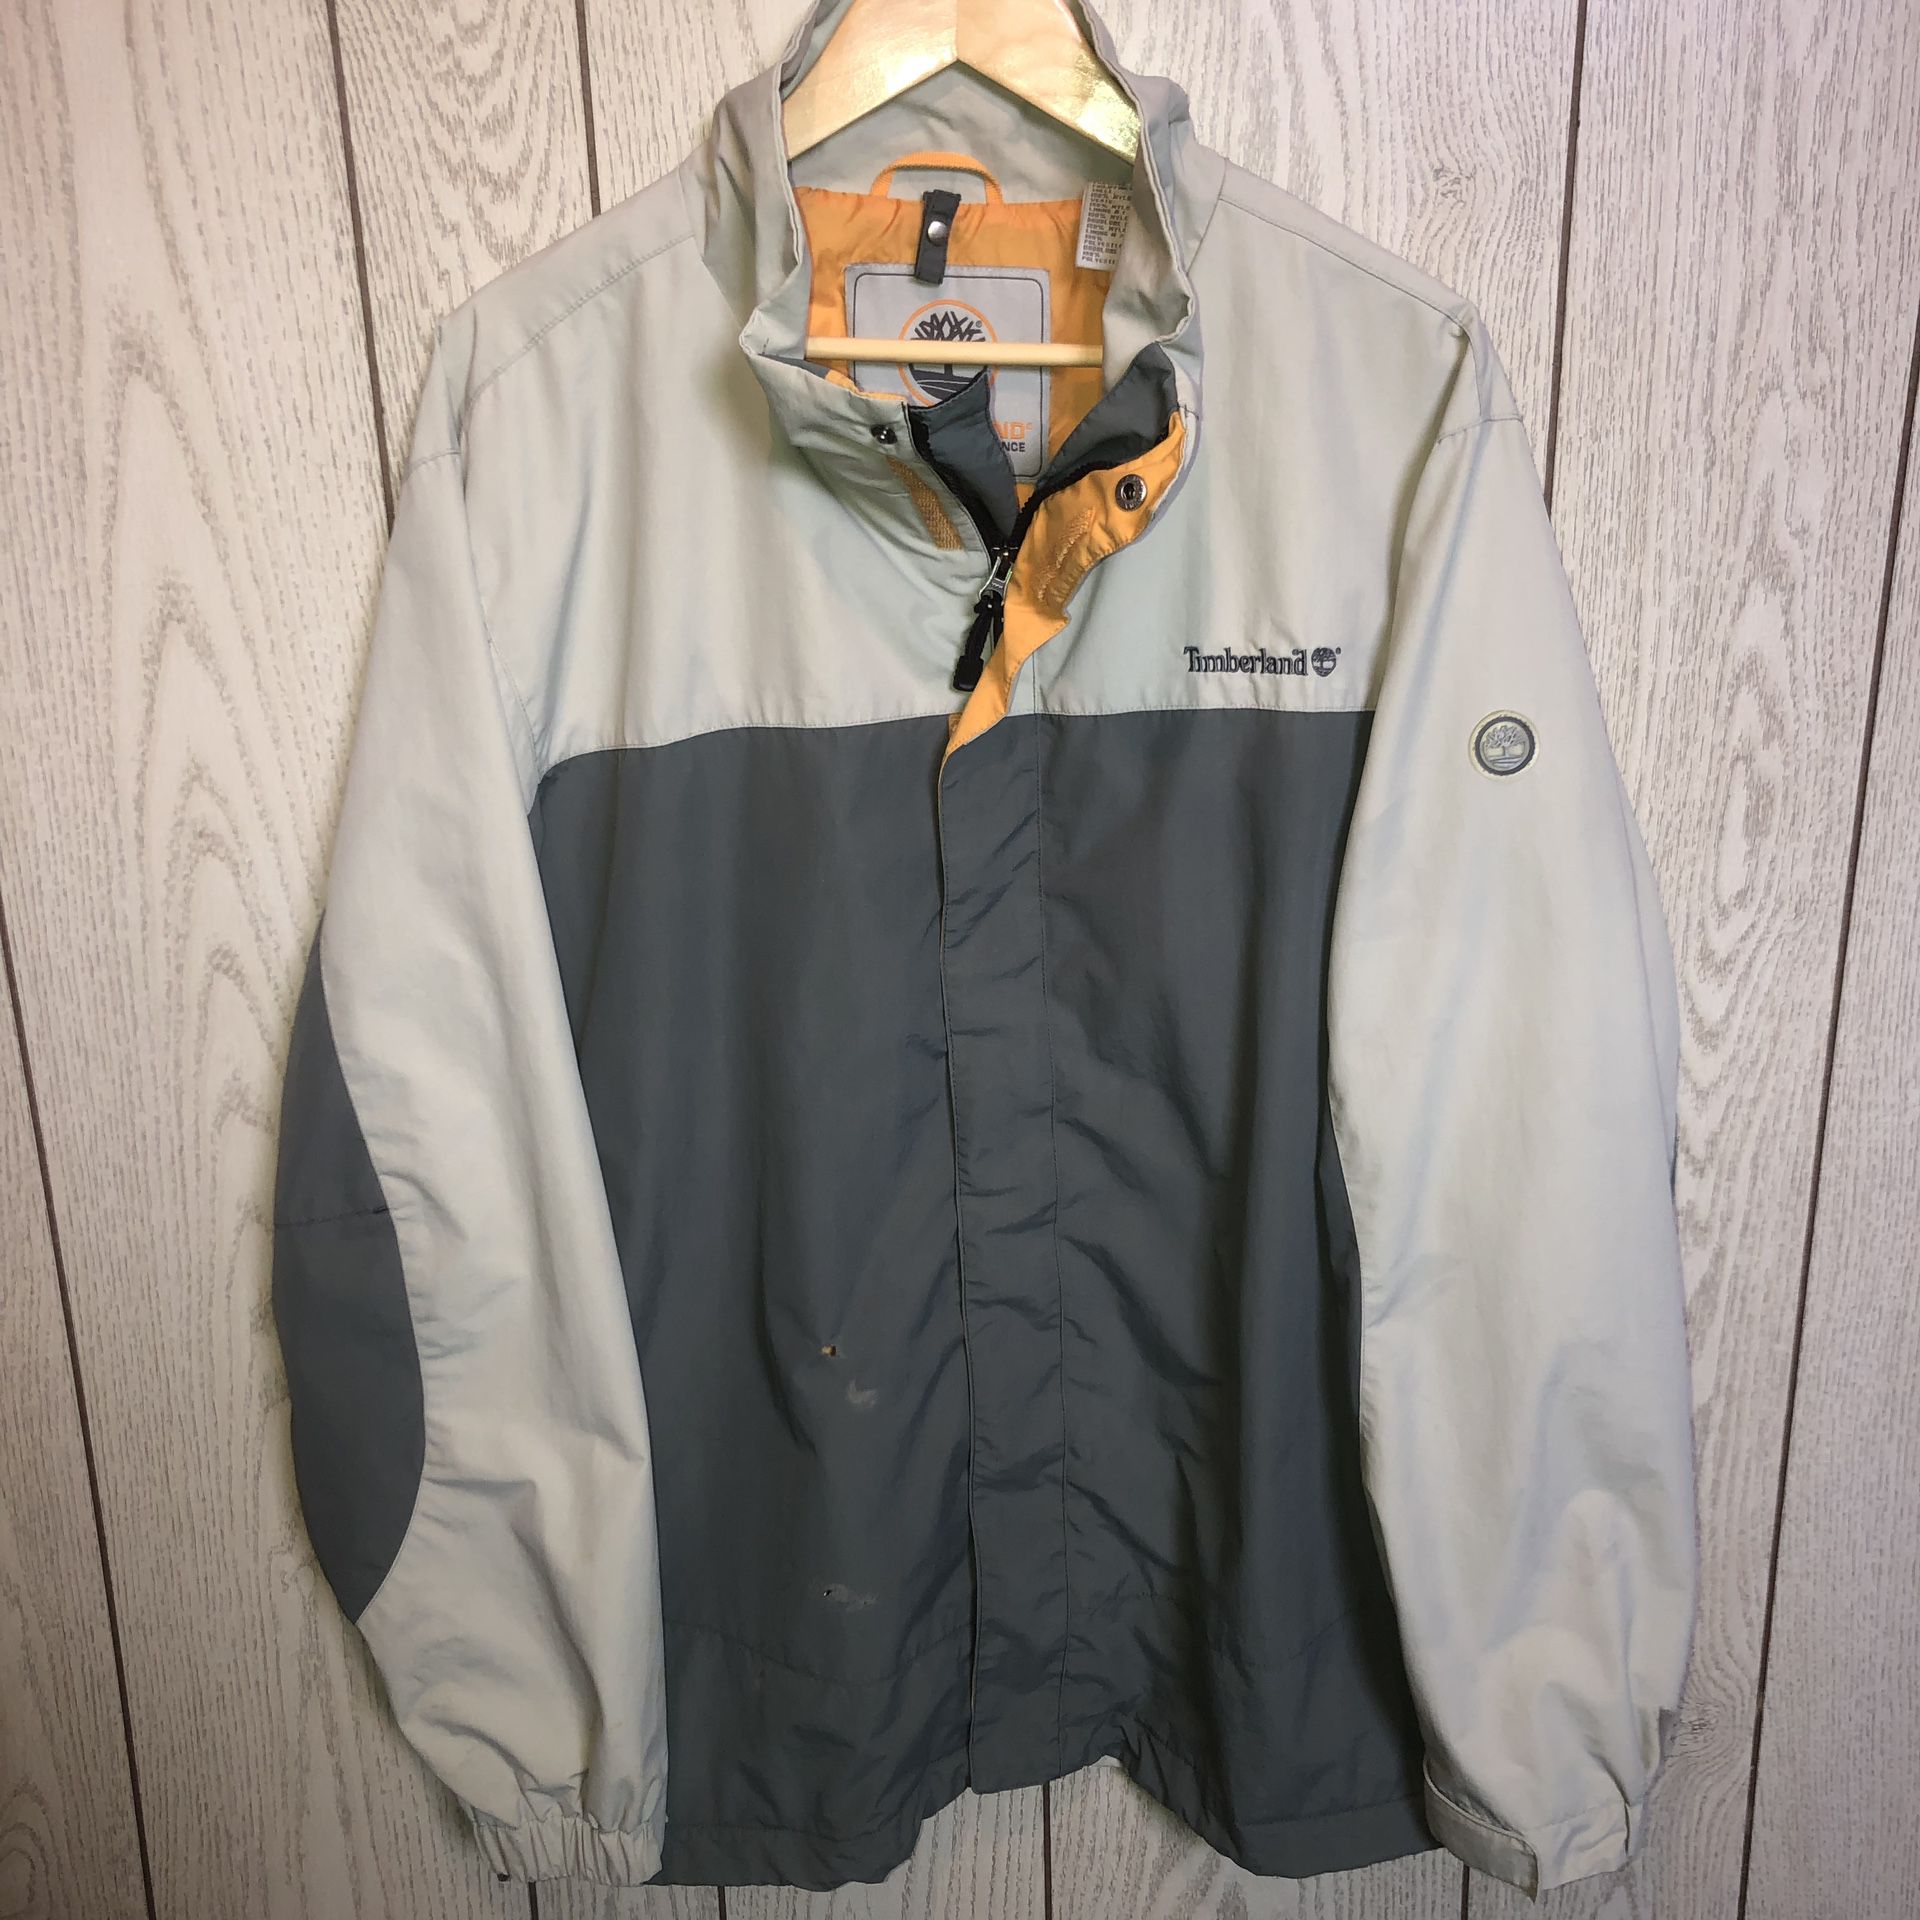 Men’s size XL Timberland Outdoor Performance Weathergear grey jacket/coat with an orange lining. It has a few spots on the back. Not sure how to rem